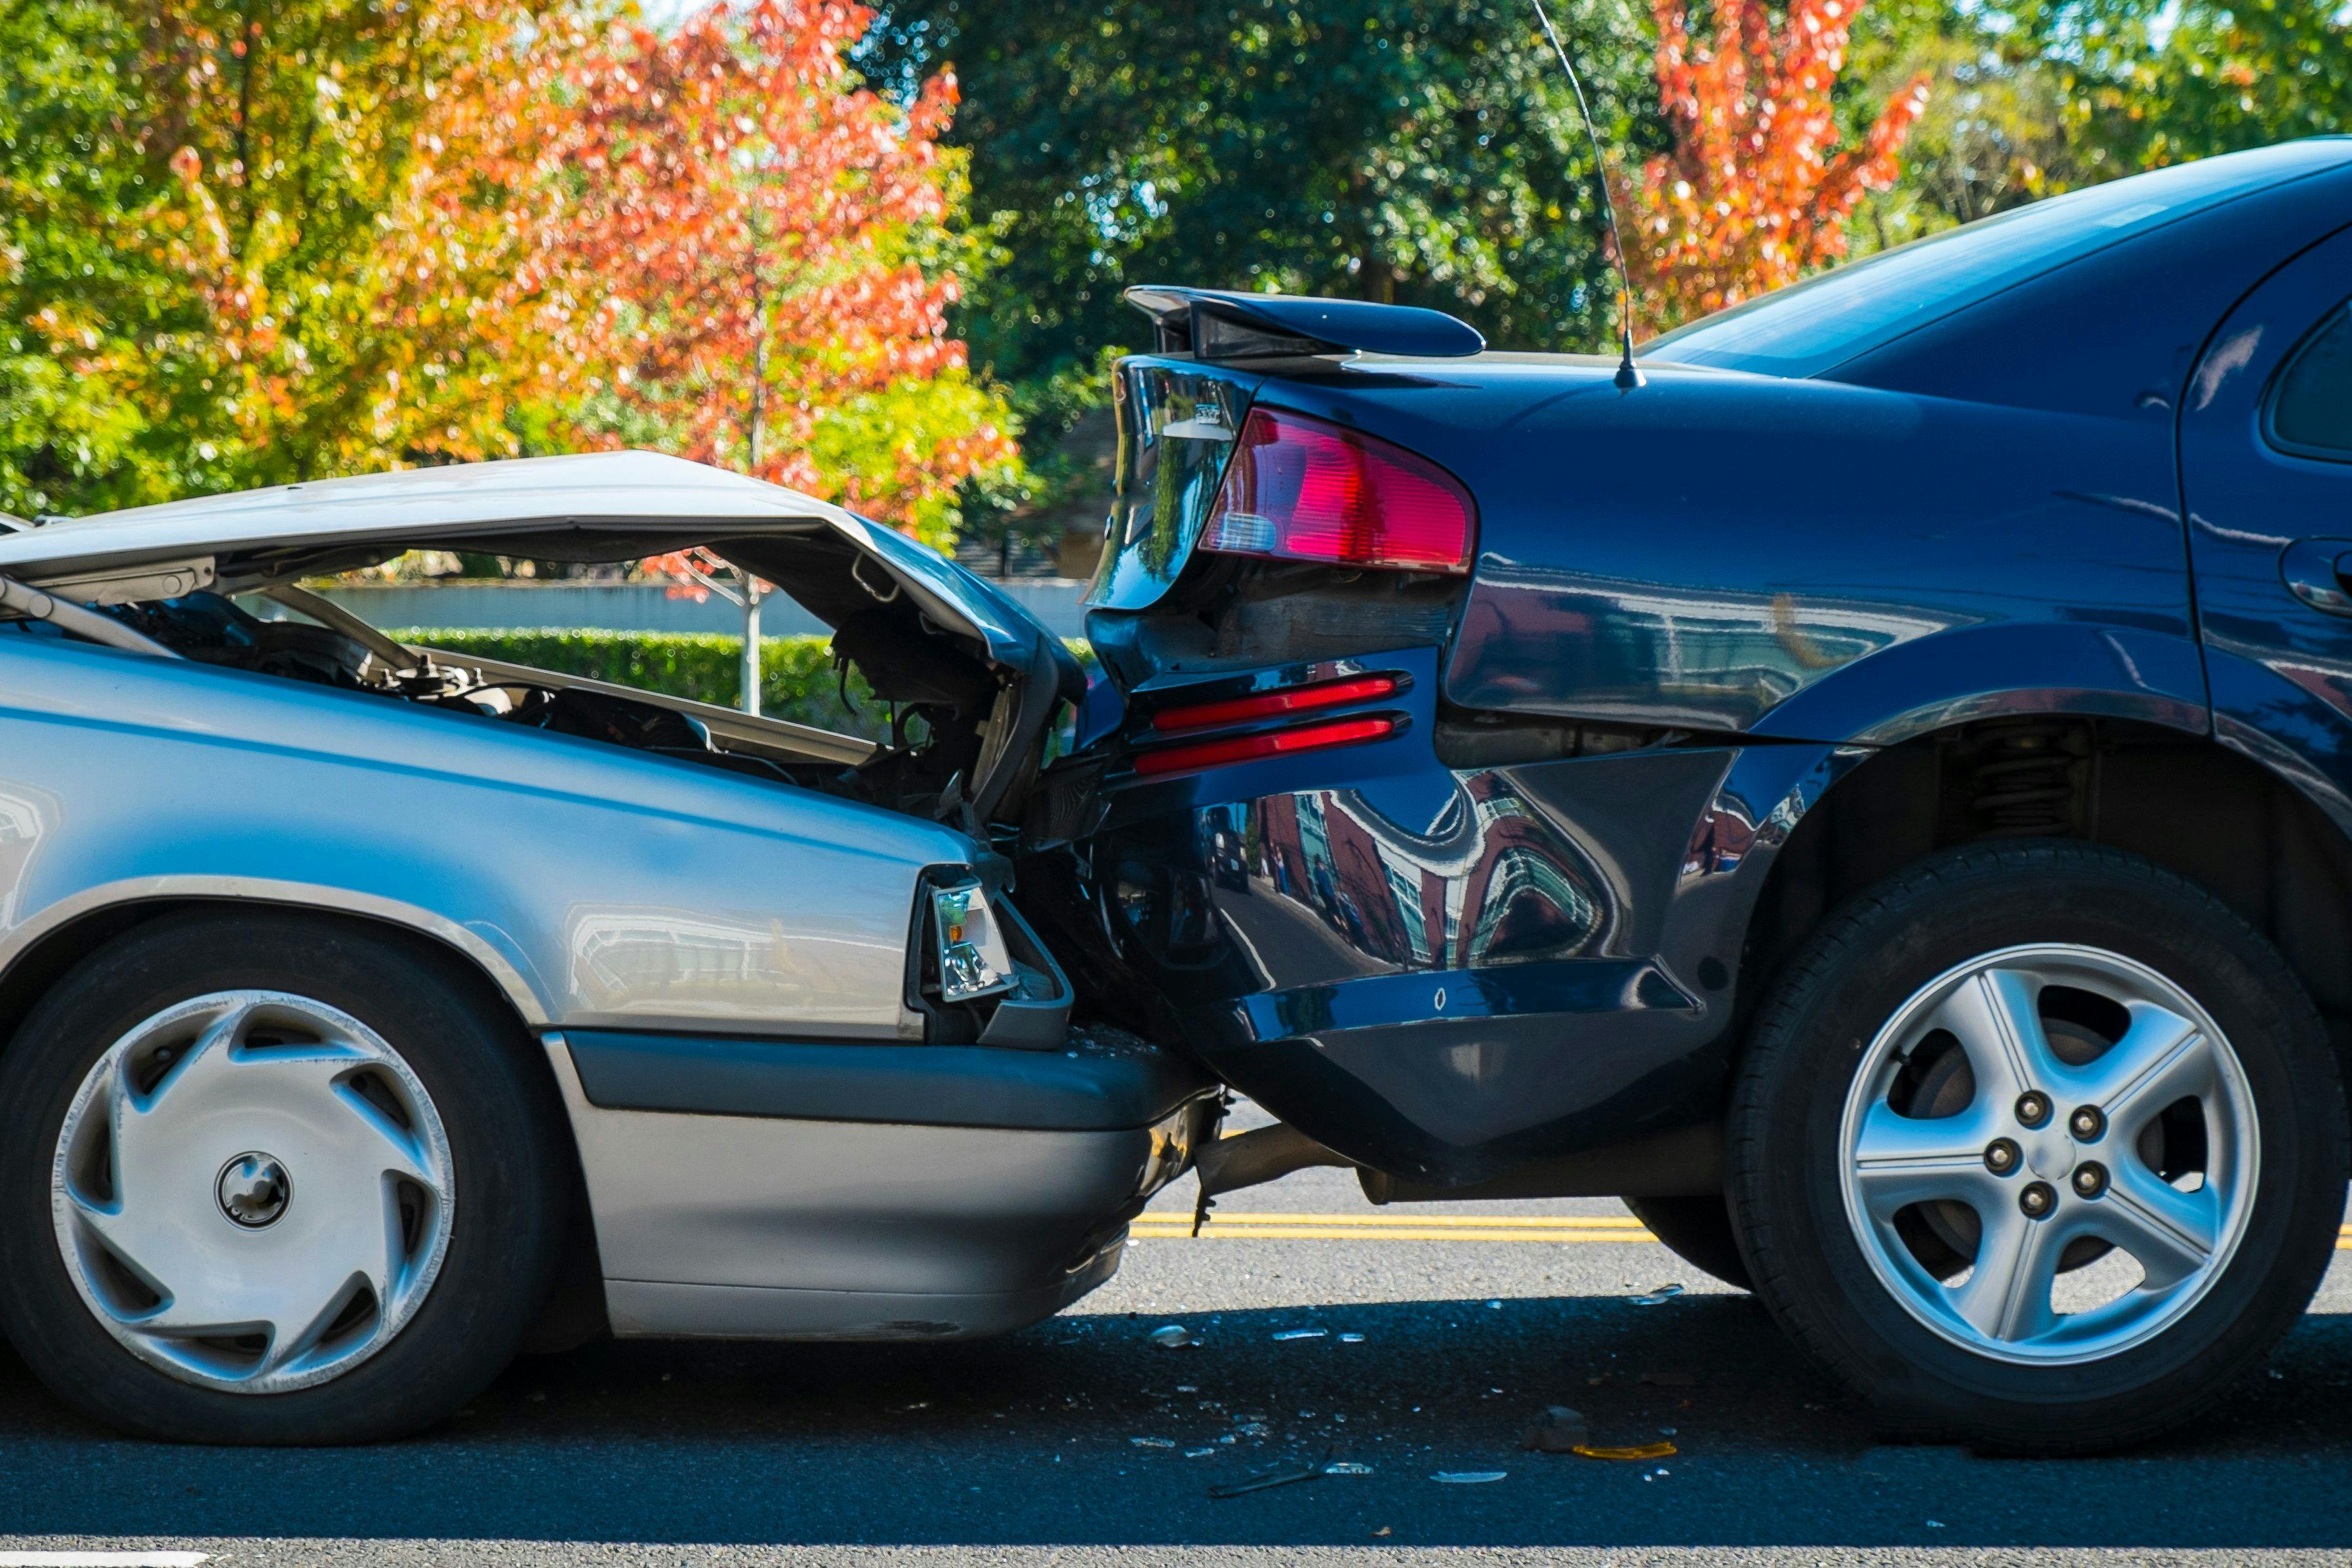 Related to The Importance of Timely Legal Action Post-Car Accident